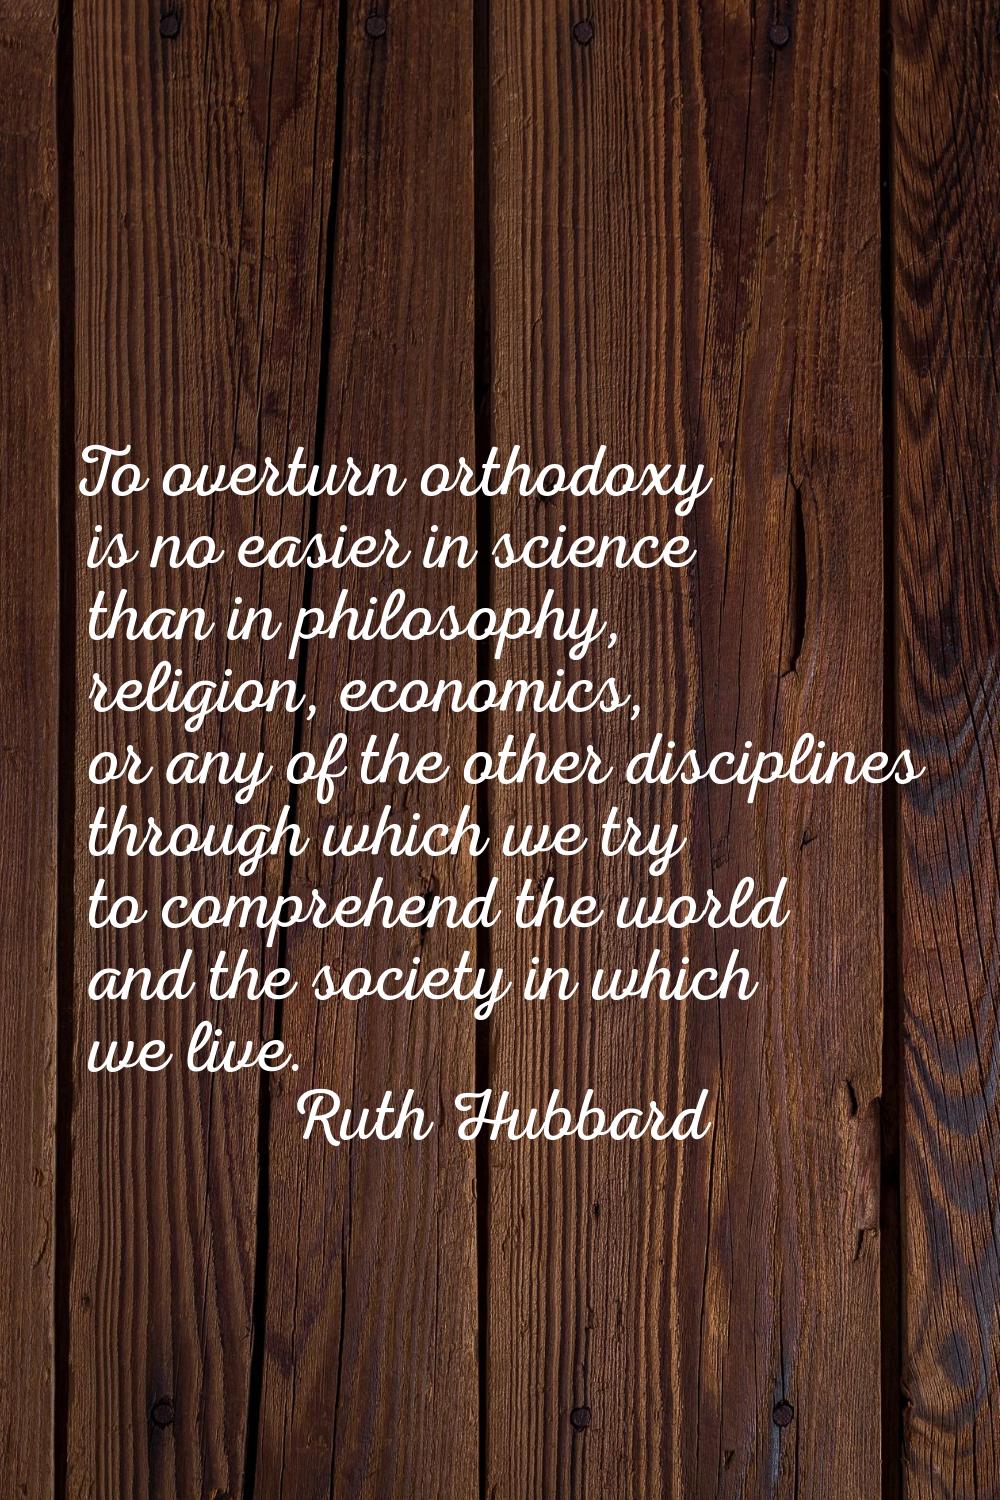 To overturn orthodoxy is no easier in science than in philosophy, religion, economics, or any of th